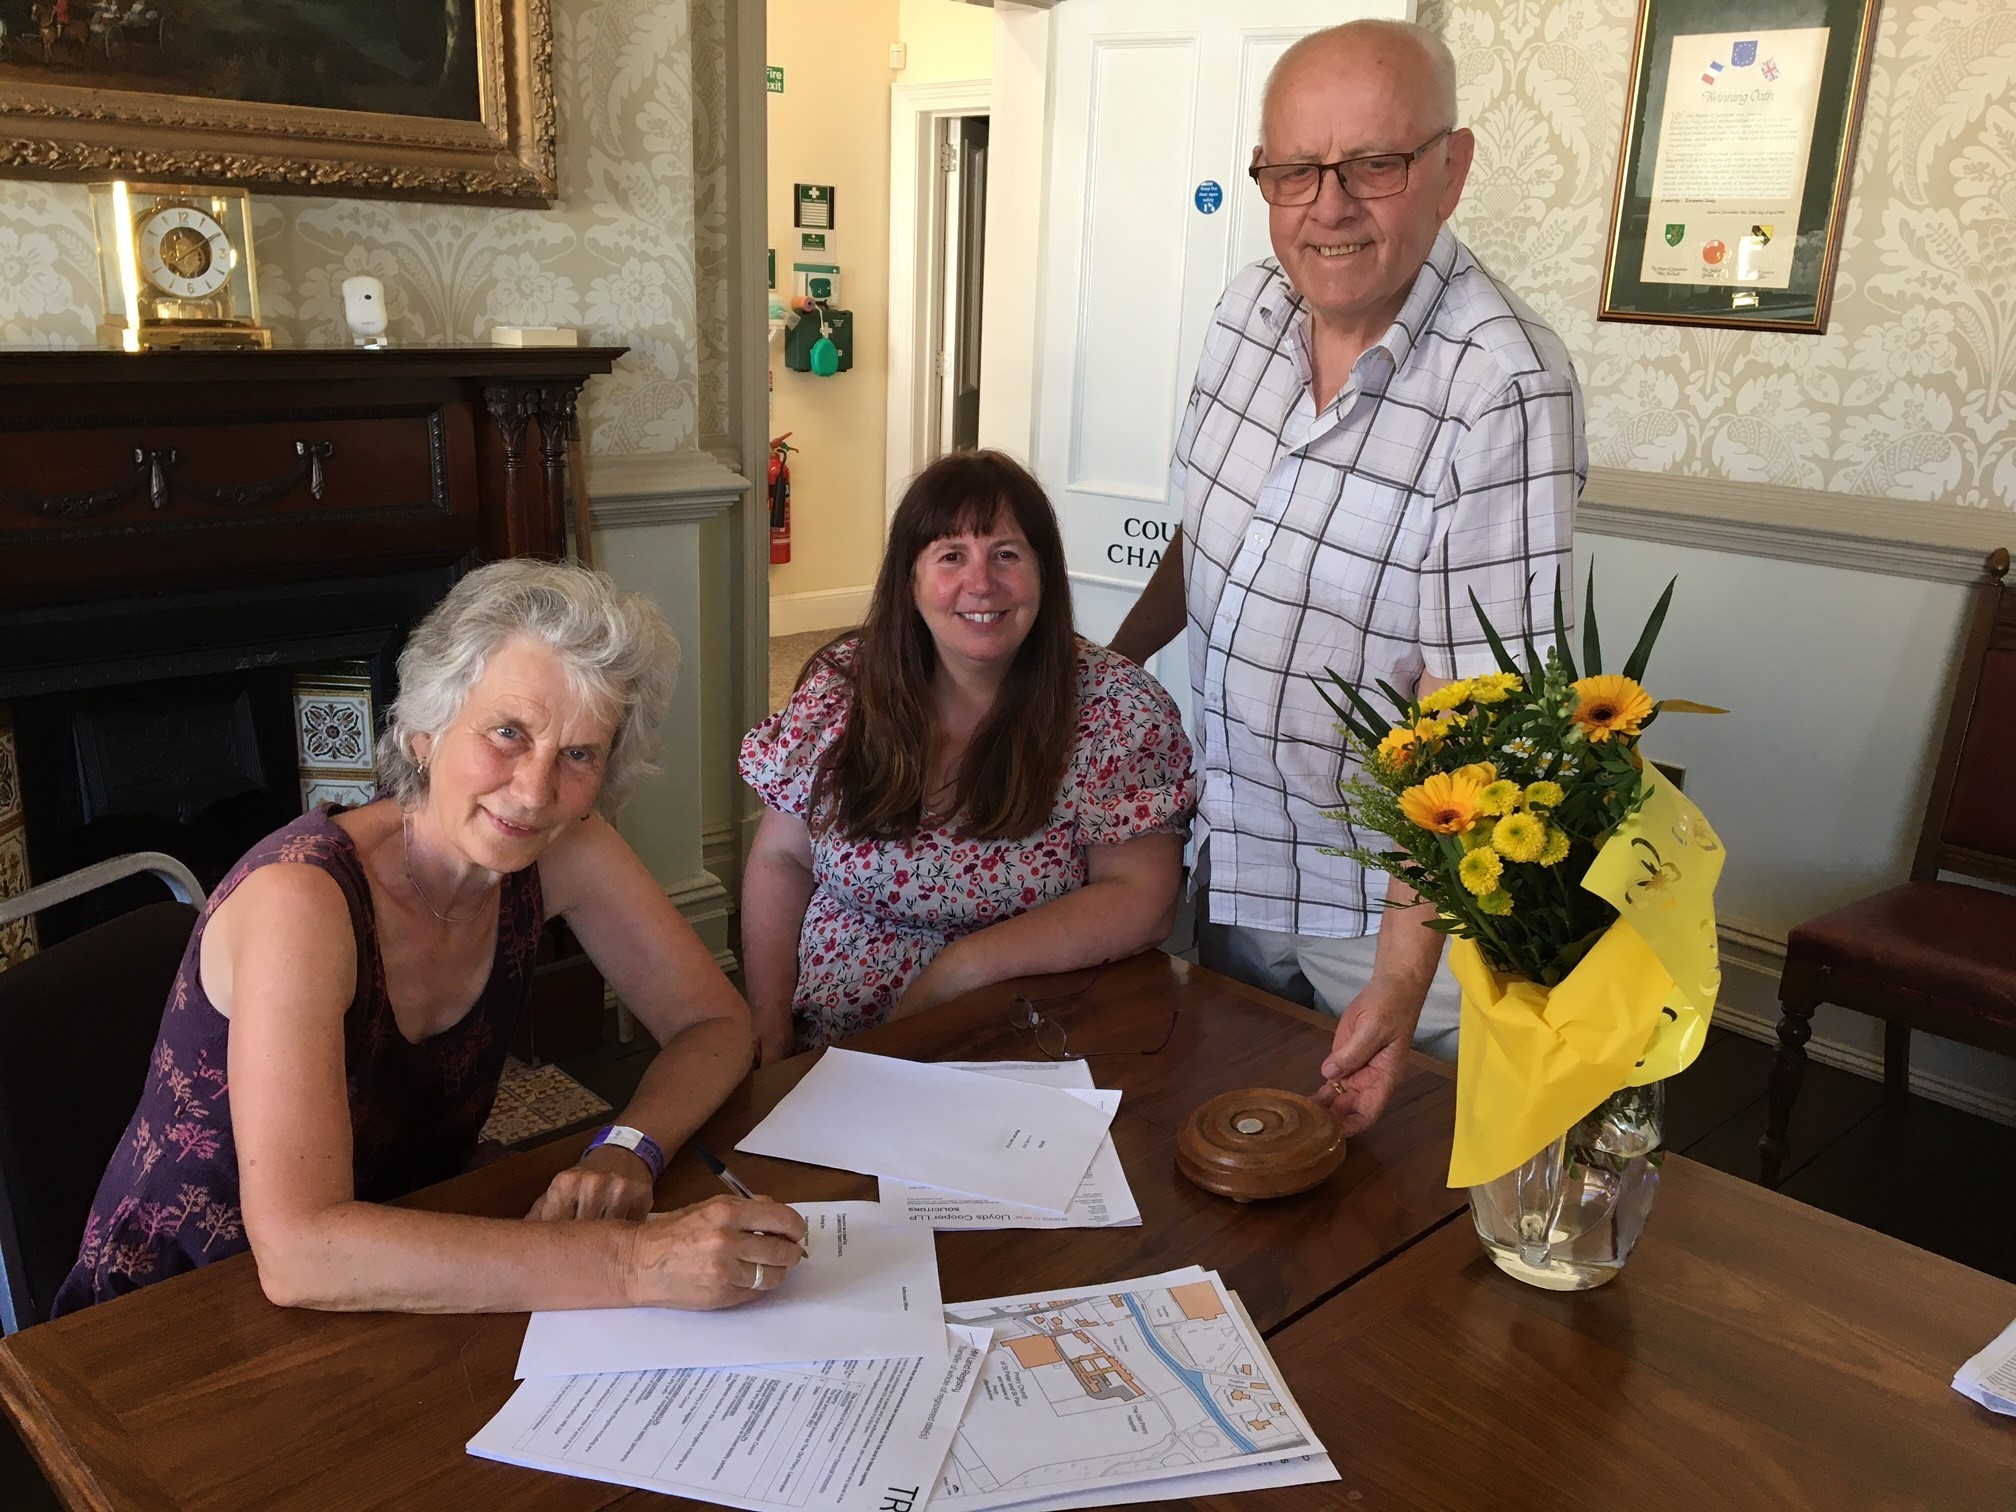 Signing the contract are left to right Trish Marsh, Mayor of Leominster, Julie Debbage, Town Clerk and Allan Williams, Deputy Mayor of Leominster.